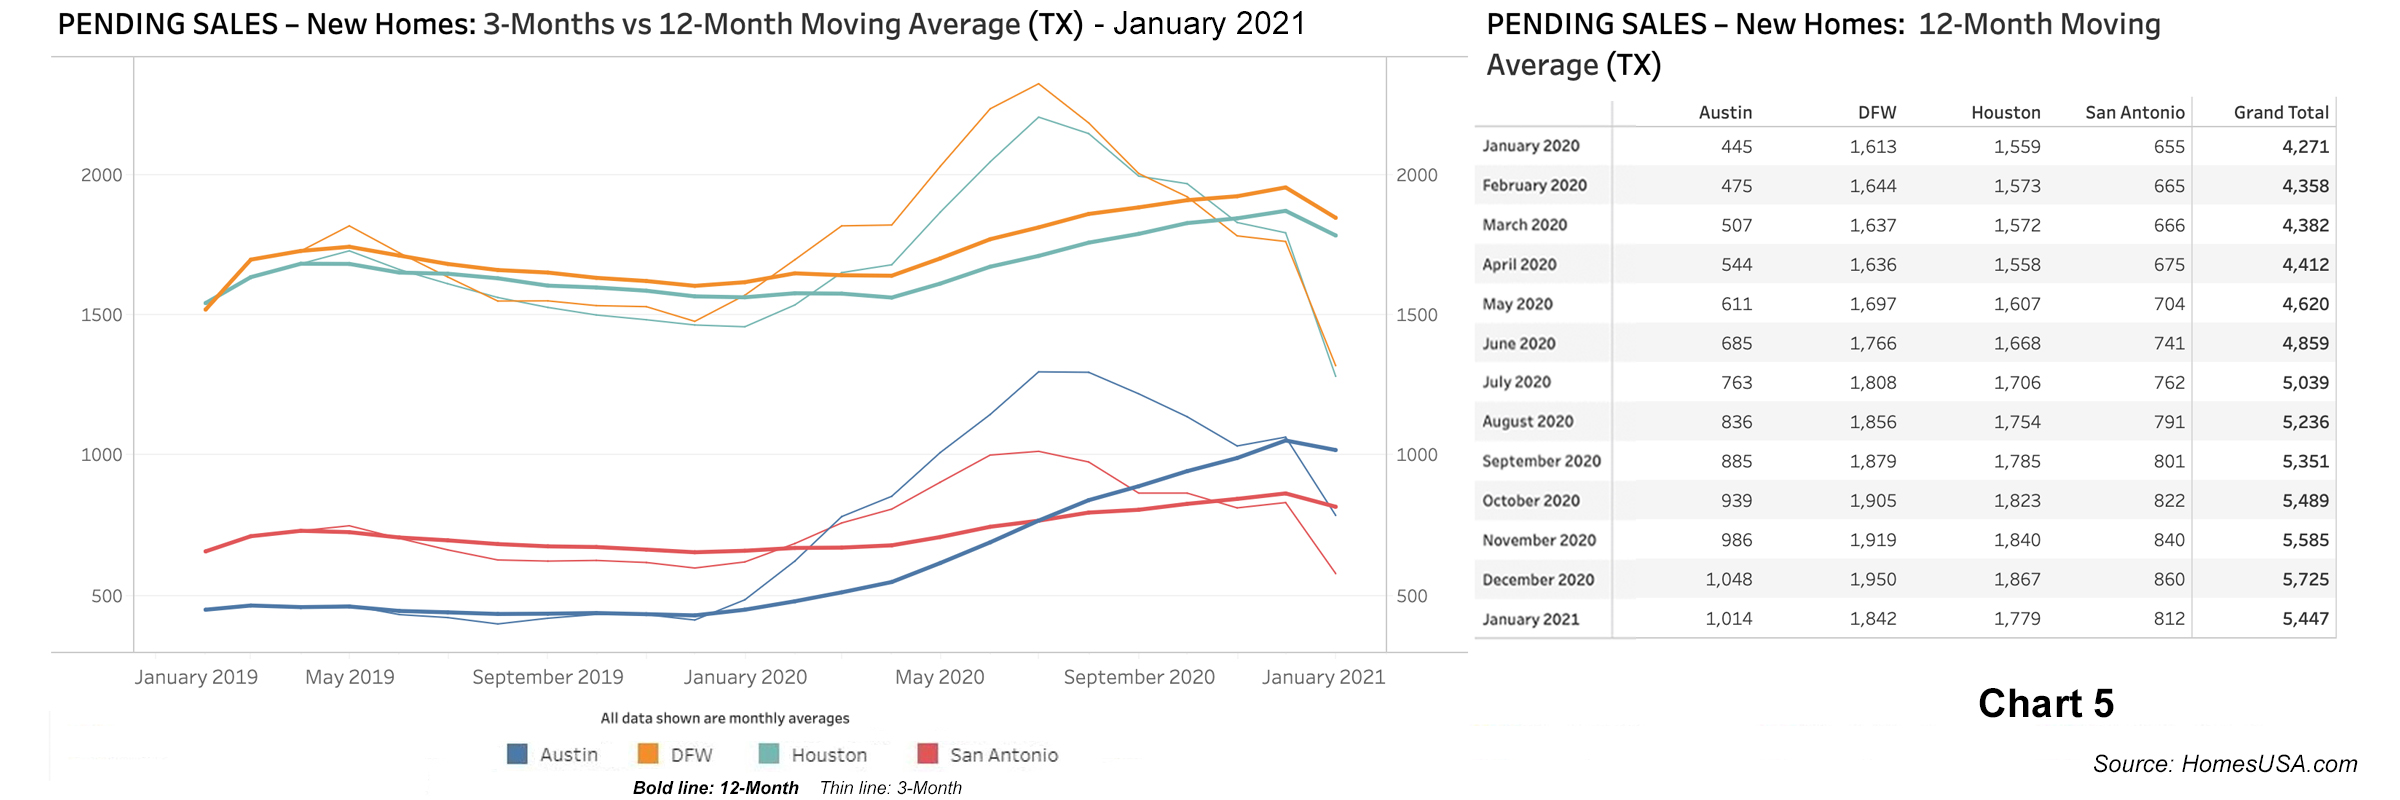 Chart 5: Texas Pending New Homes Sales - January 2021